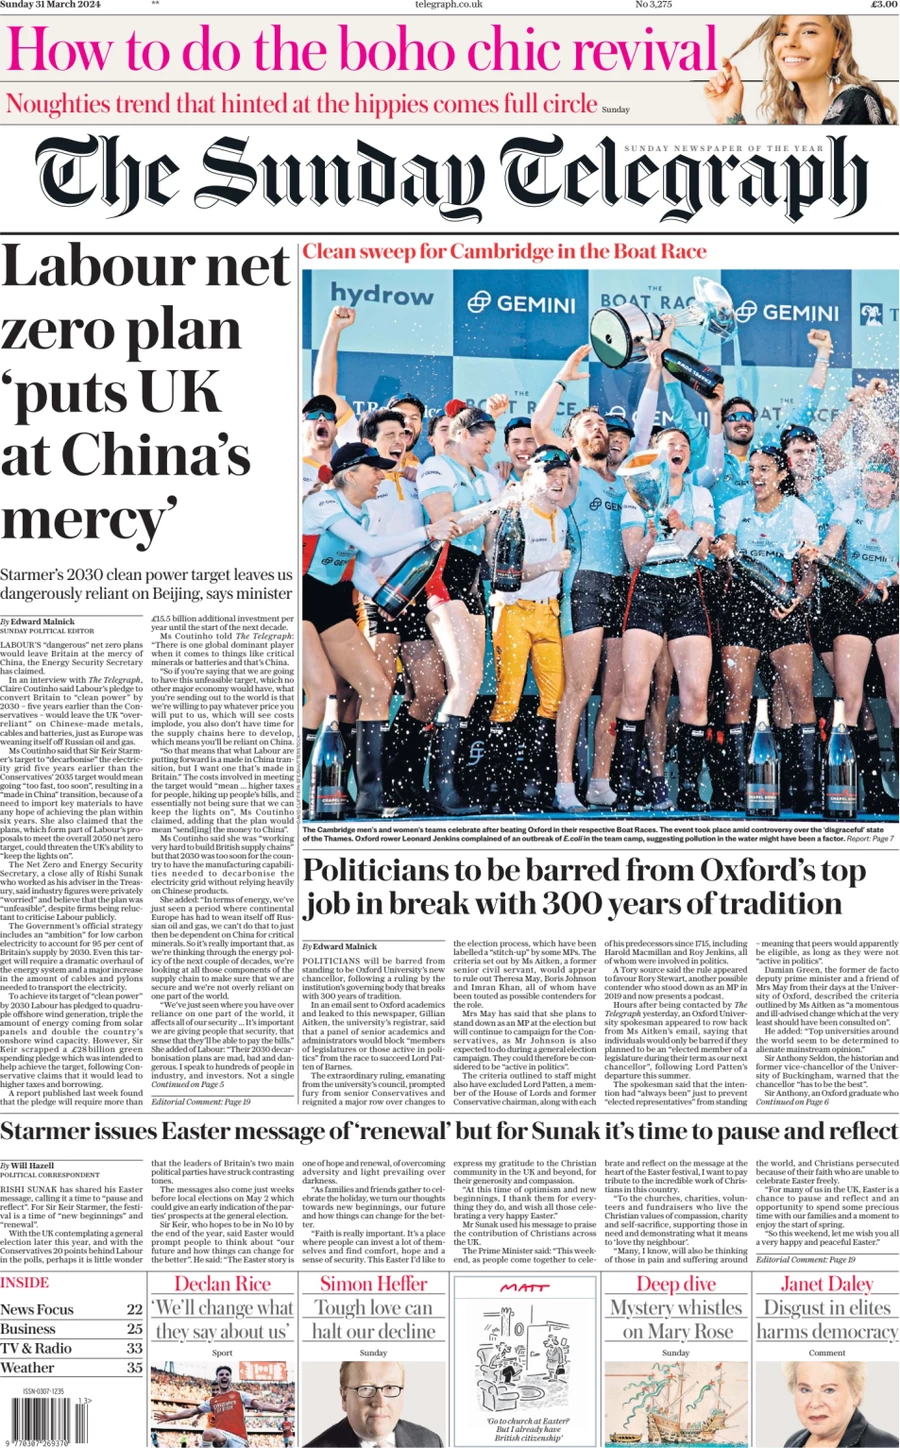 the daily telegraph 015844667 - WTX News Breaking News, fashion & Culture from around the World - Daily News Briefings -Finance, Business, Politics & Sports News